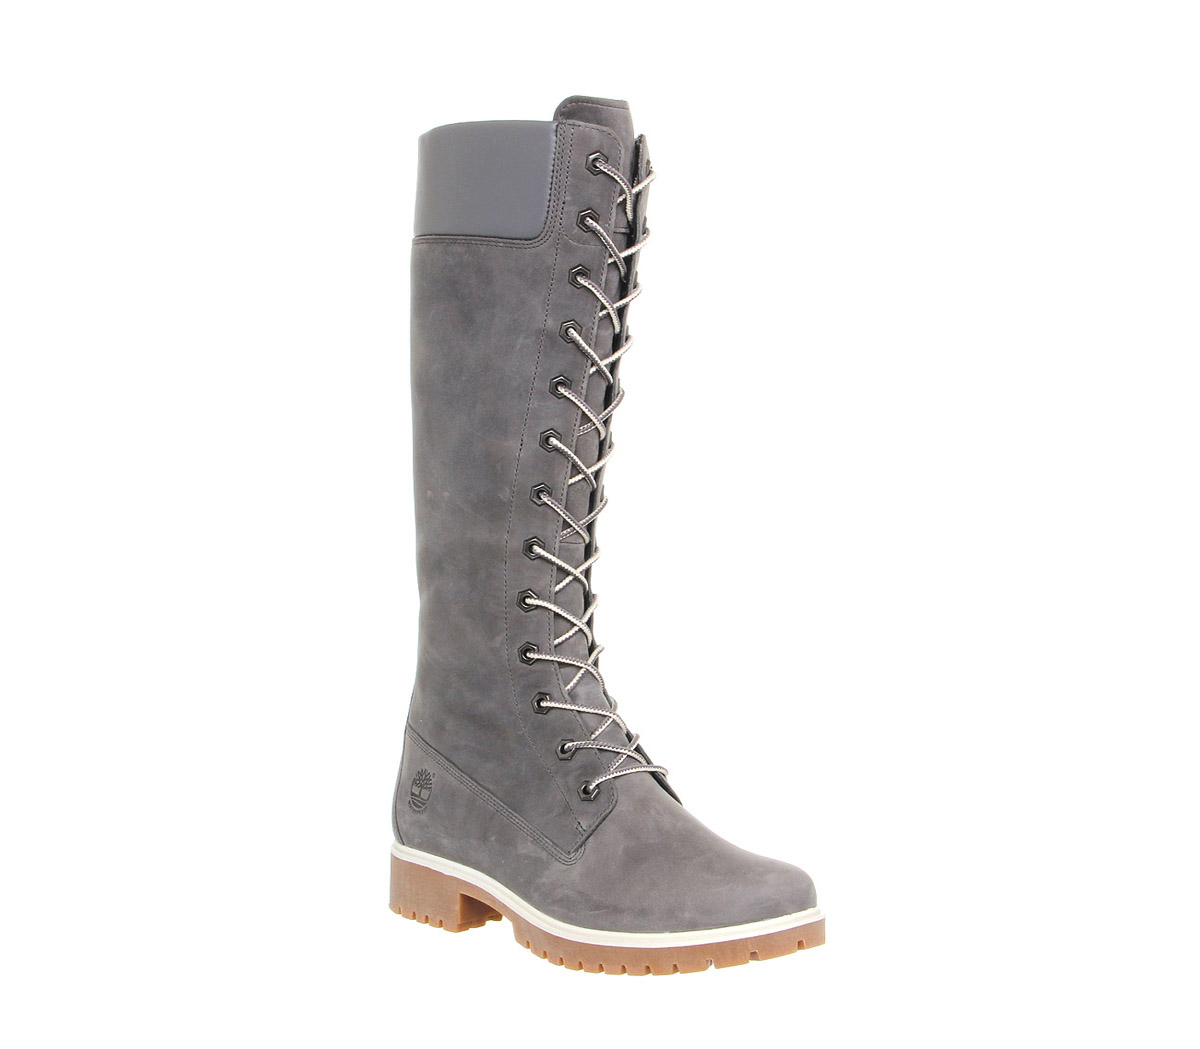 Timberland 14 Inch Premium Boot in Grey (Grey) - Lyst